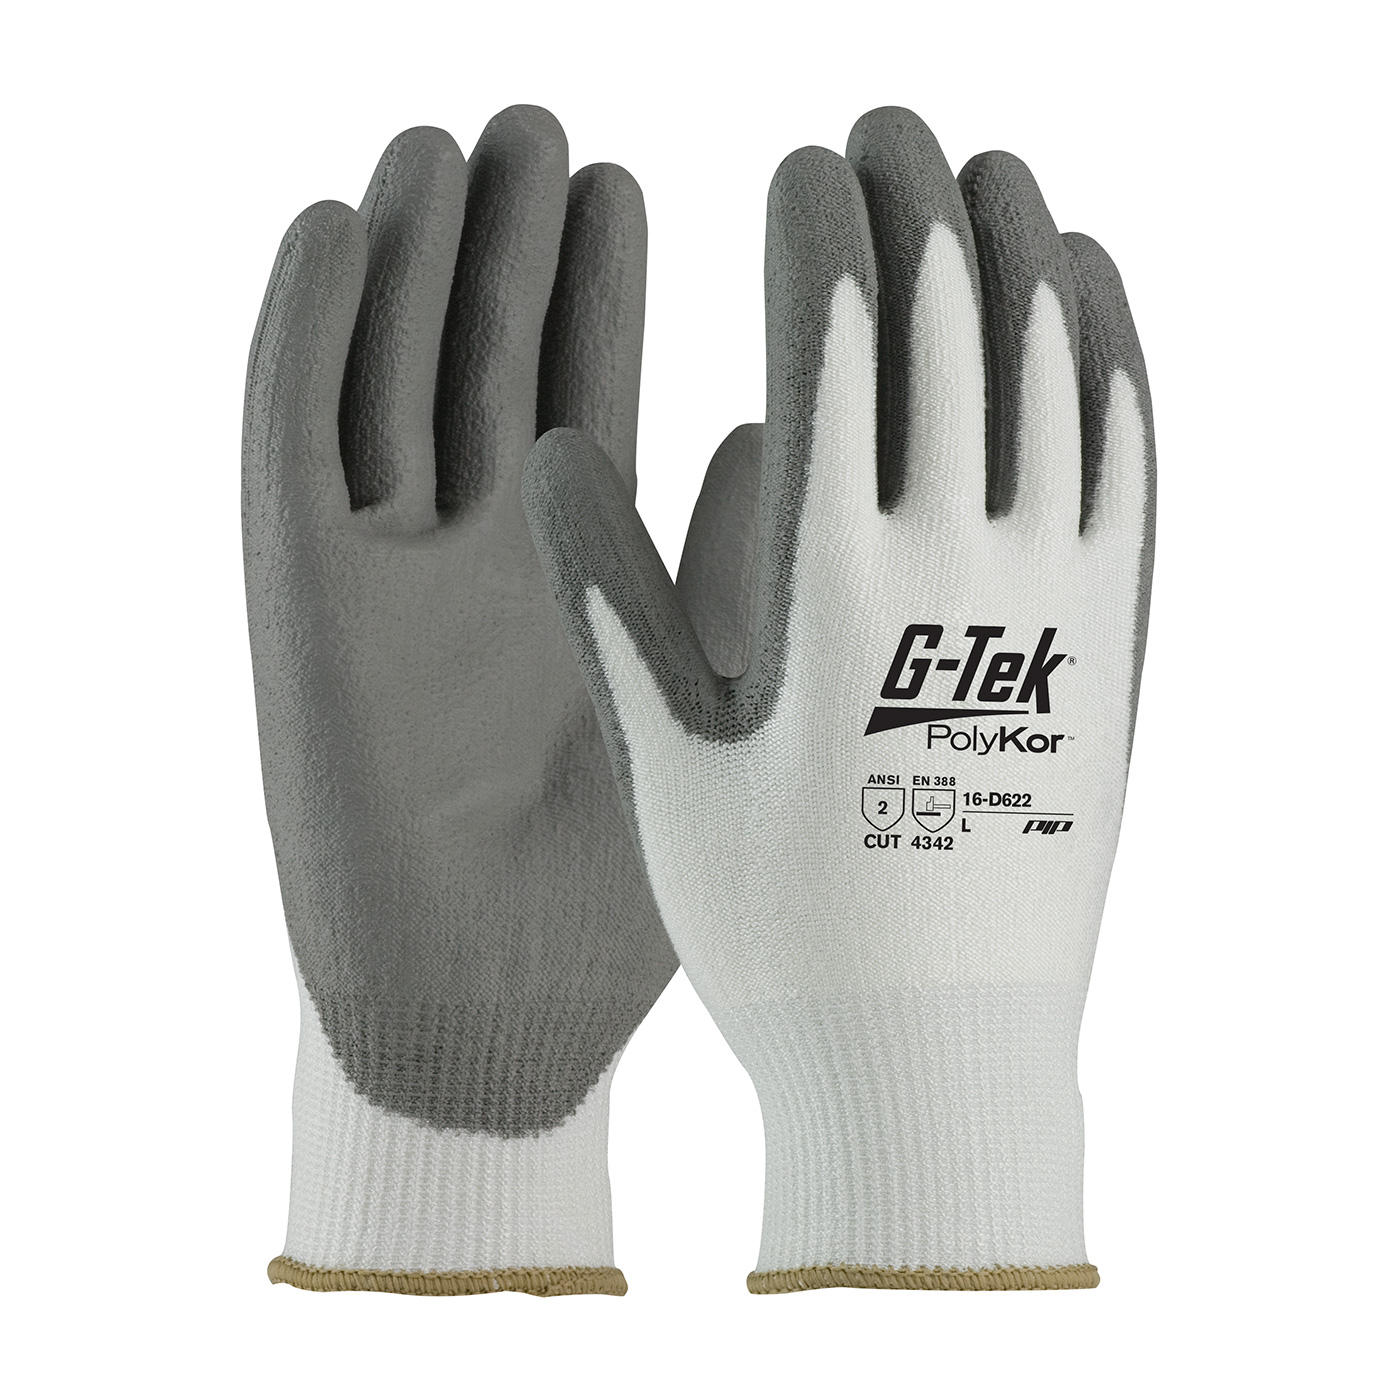 PIP 16-D622/XXL G-Tek PolyKor Seamless Knit PolyKor Blended Glove with Polyurethane Coated Smooth Grip on Palm & Fingers - 2X-Large PID-16 D622 2X